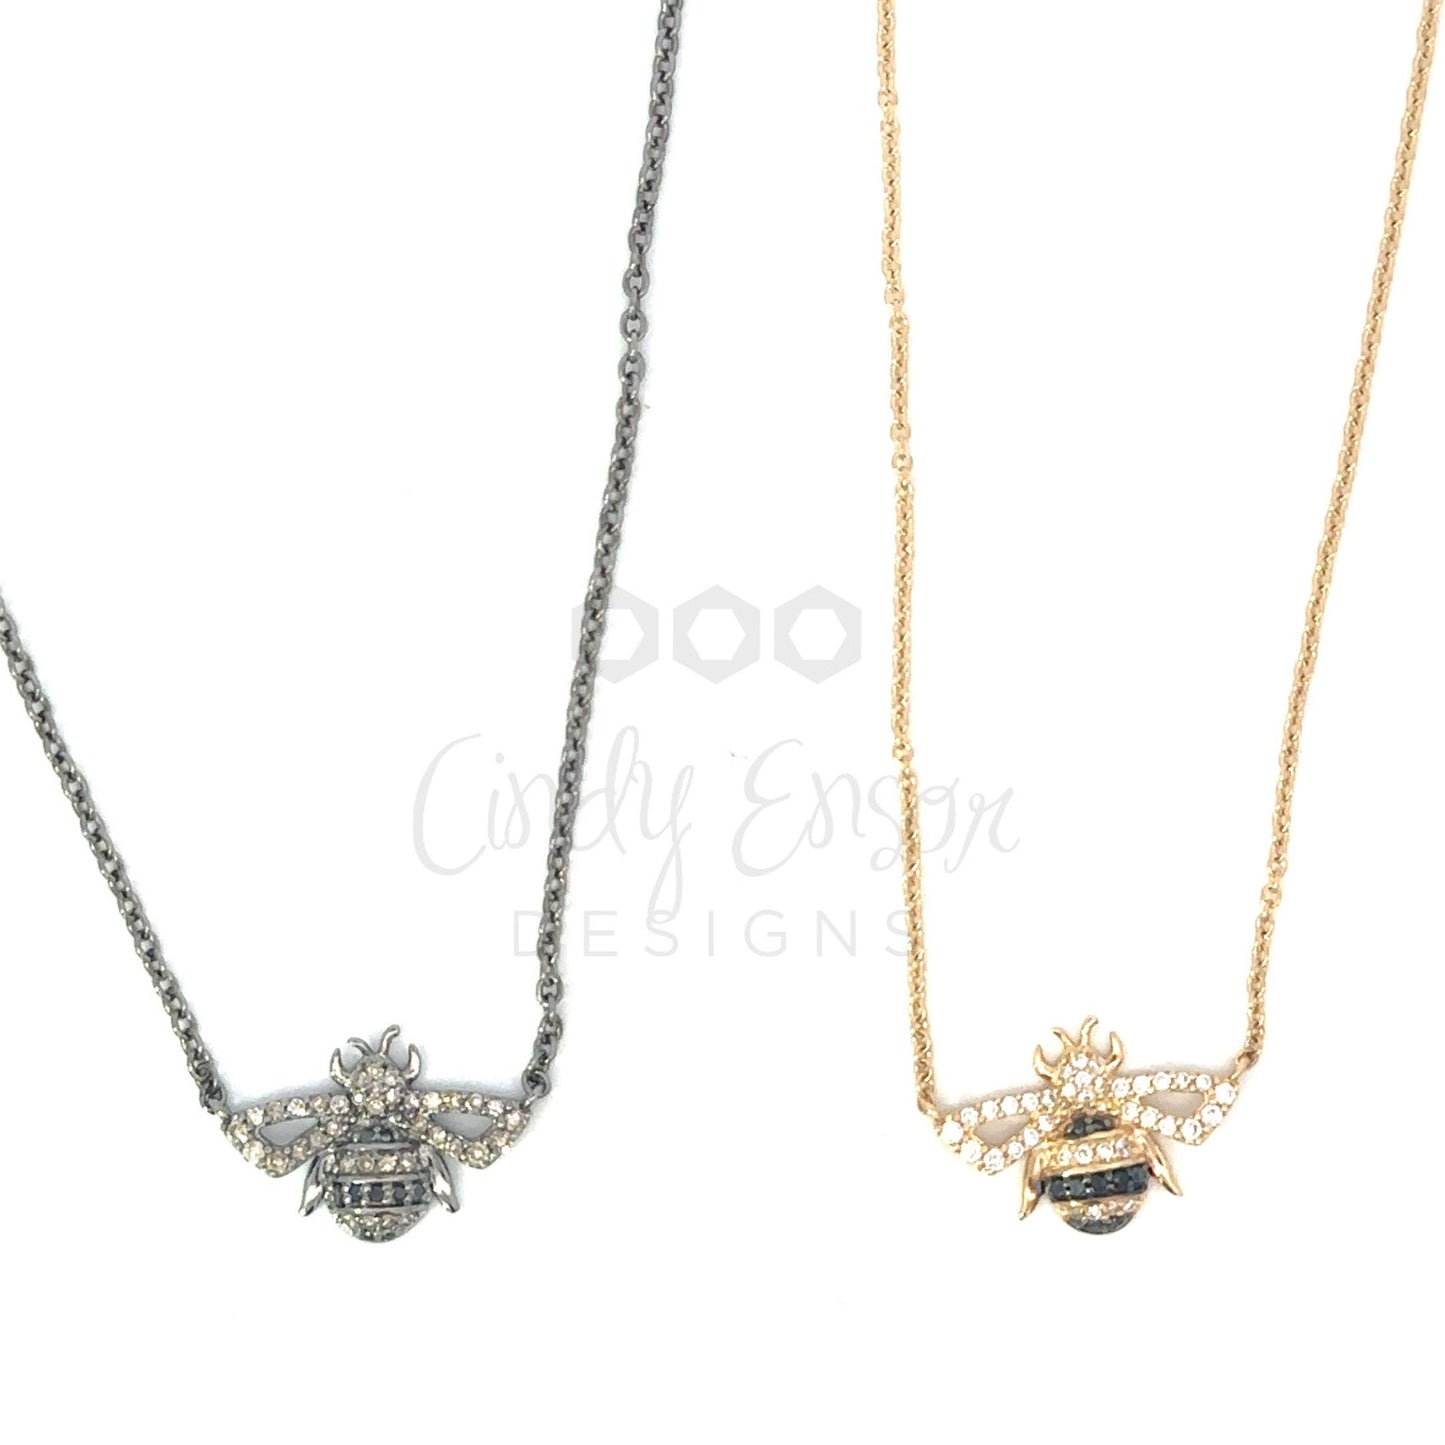 Black and White Pave Diamond Bee Necklace